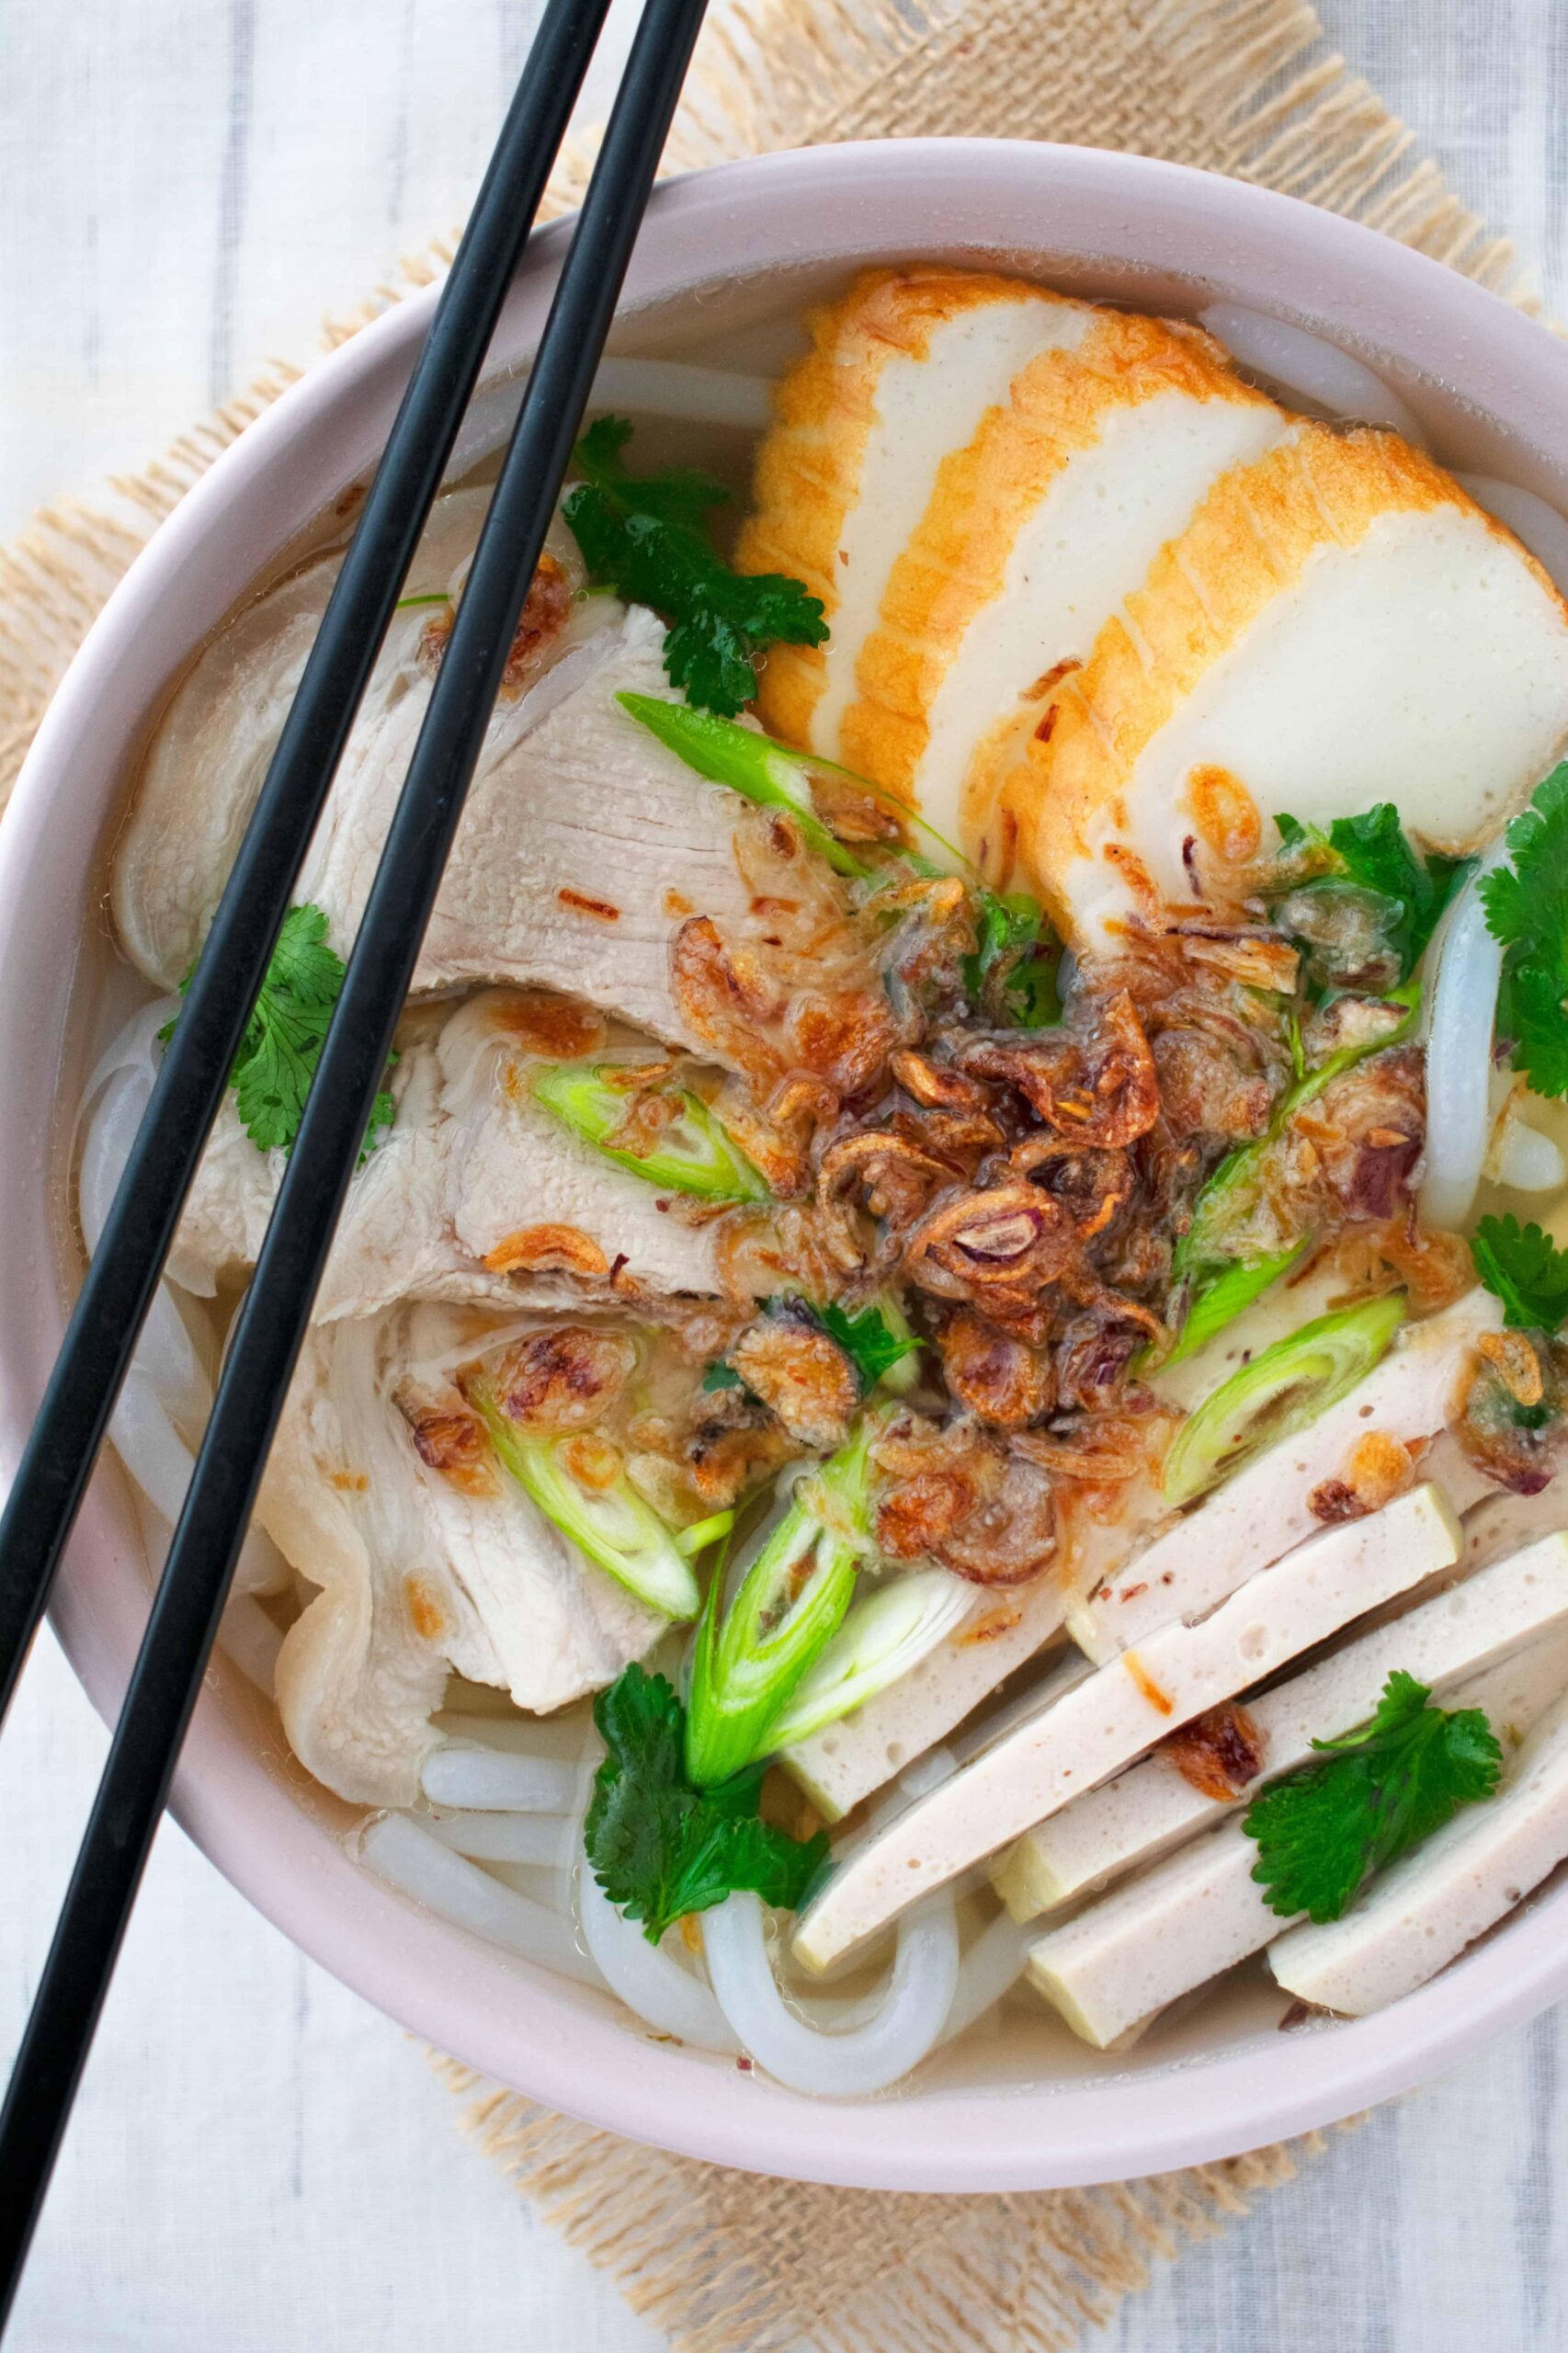  Get ready for a delicious trip to Southeast Asia with this comforting Vietnamese noodle soup.